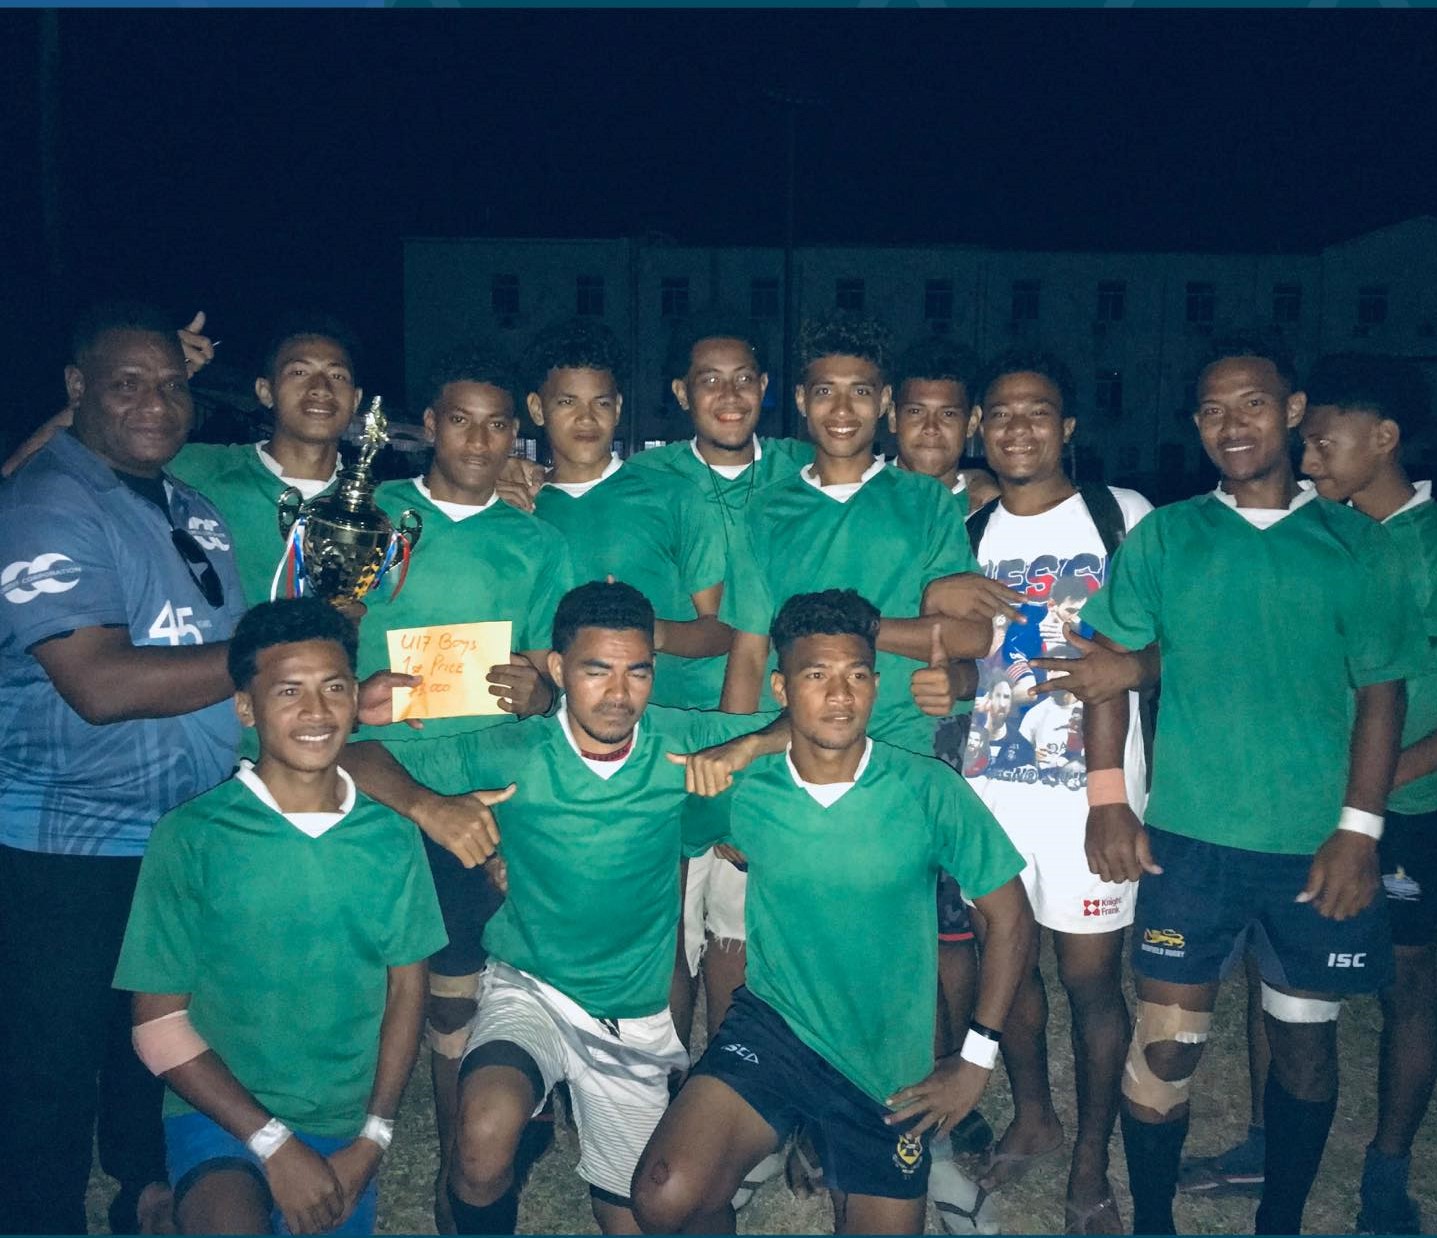 Koloale are the proud champs of the Credit Corporation High School rugby 7s